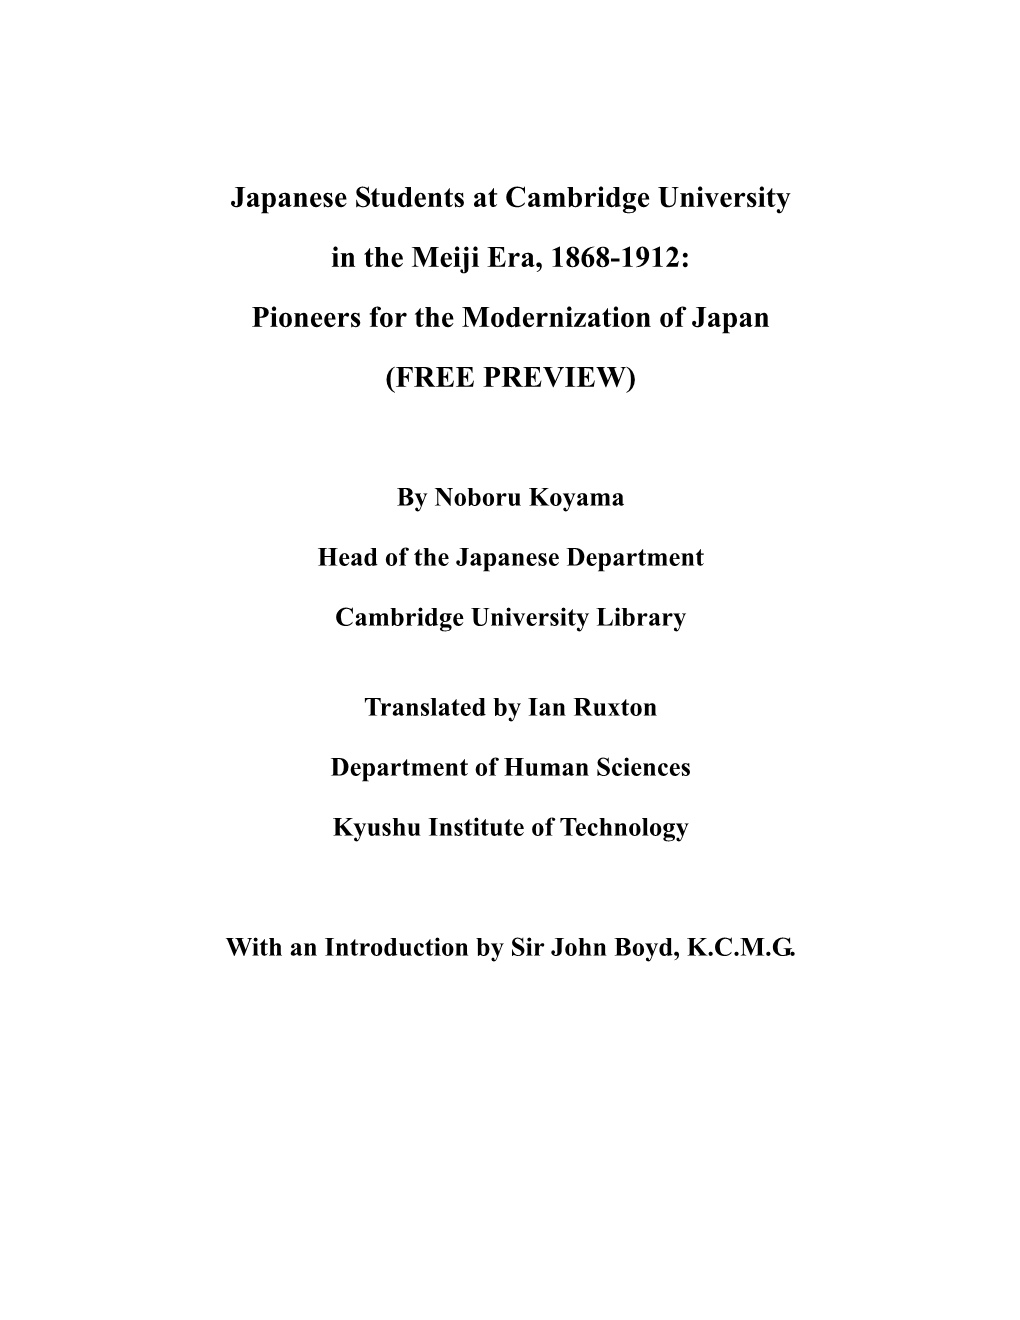 Japanese Students at Cambridge University in the Meiji Era, 1868-1912: Pioneers for the Modernization of Japan (FREE PREVIEW)